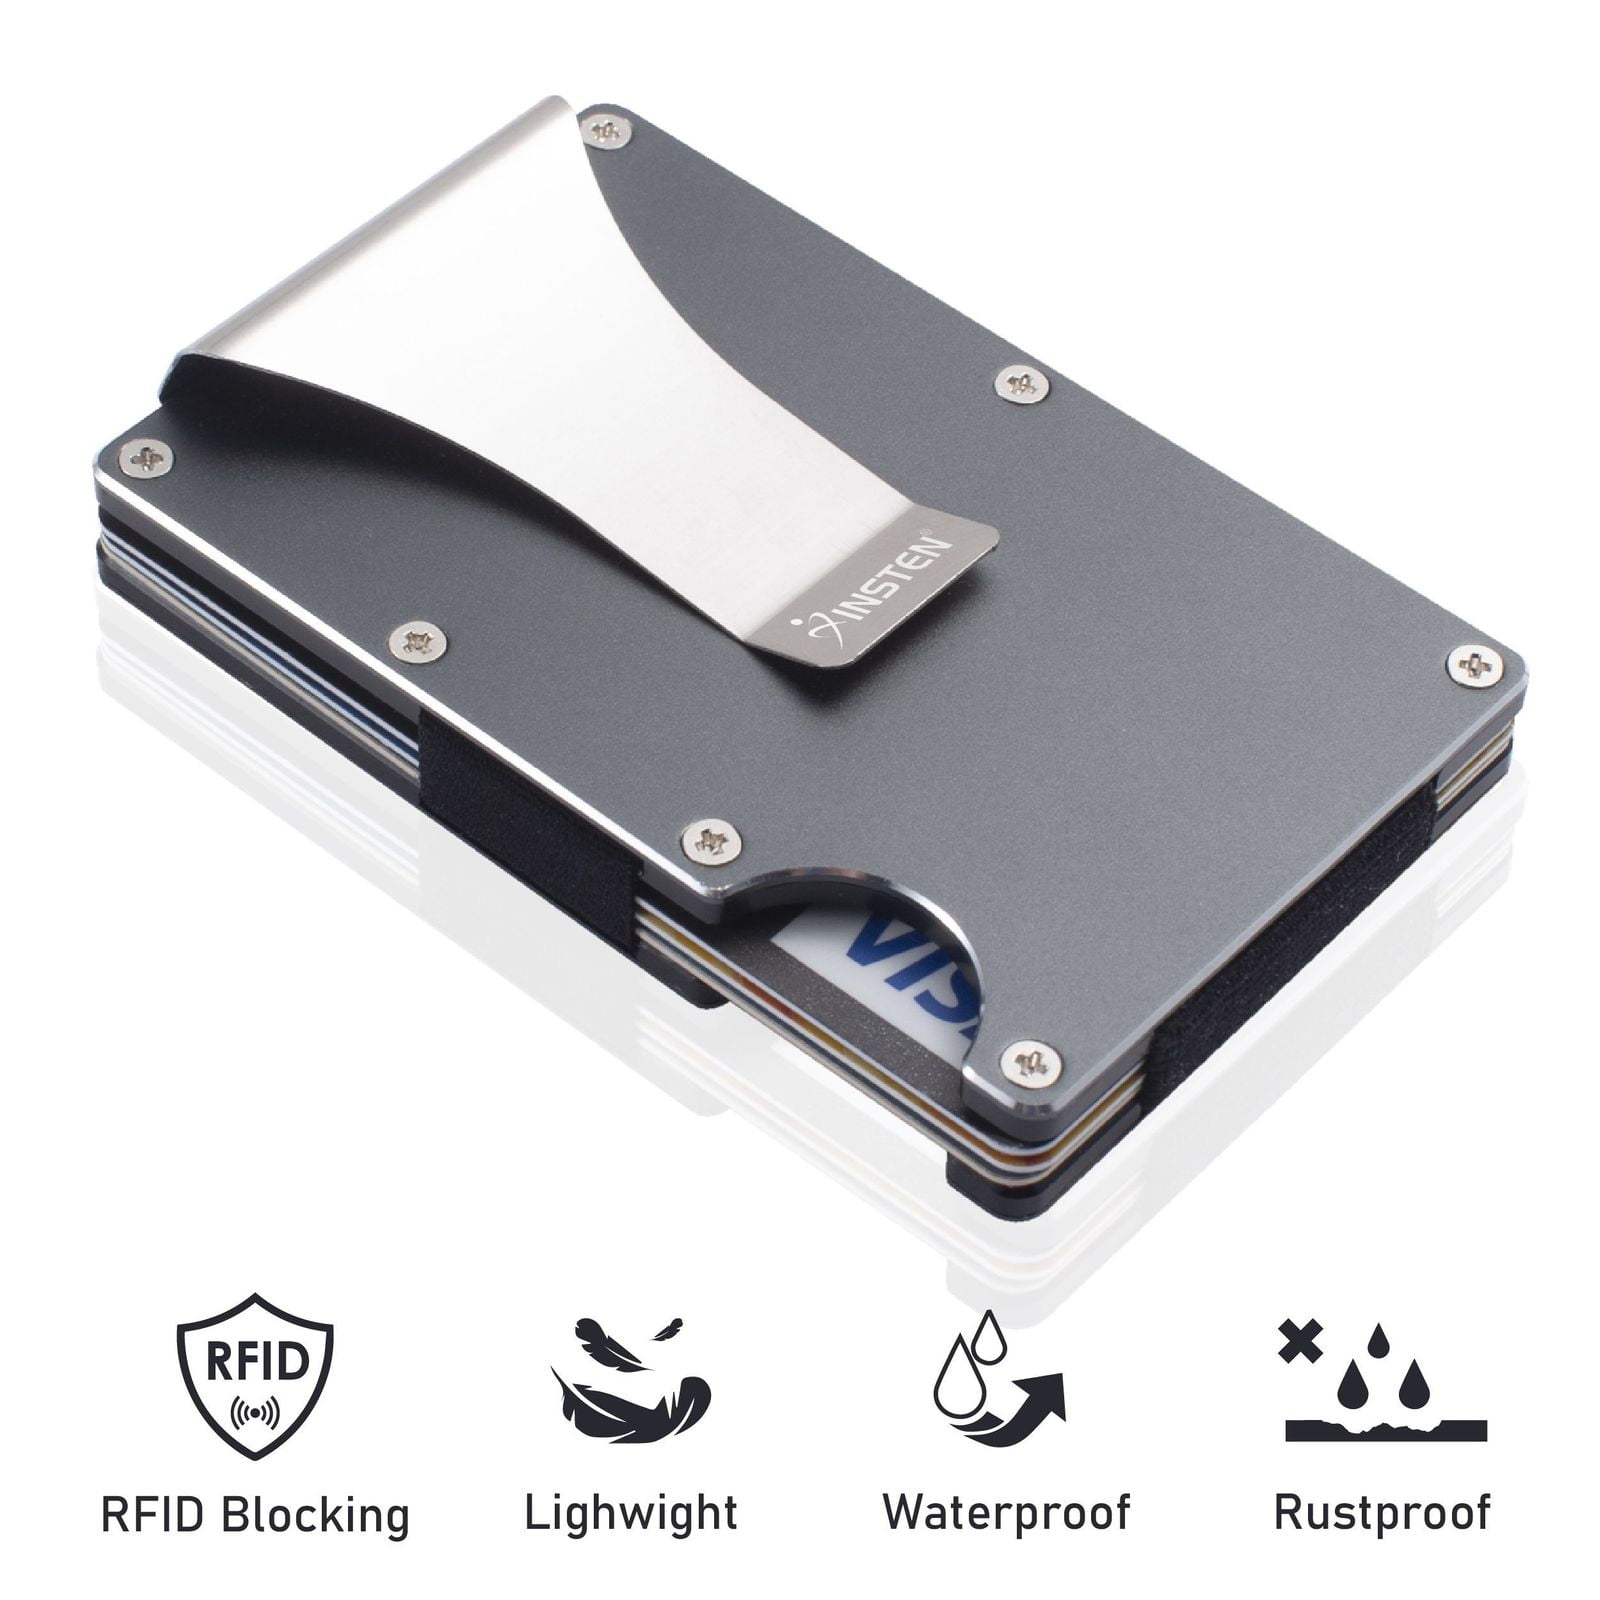 Front Pocket Credit Card Holder and banknote Holder with RFID Protection It can Hold up to 12 Cards Slim Wallet Aluminum Minimalist Wallet for EDC with Steel Money Clip